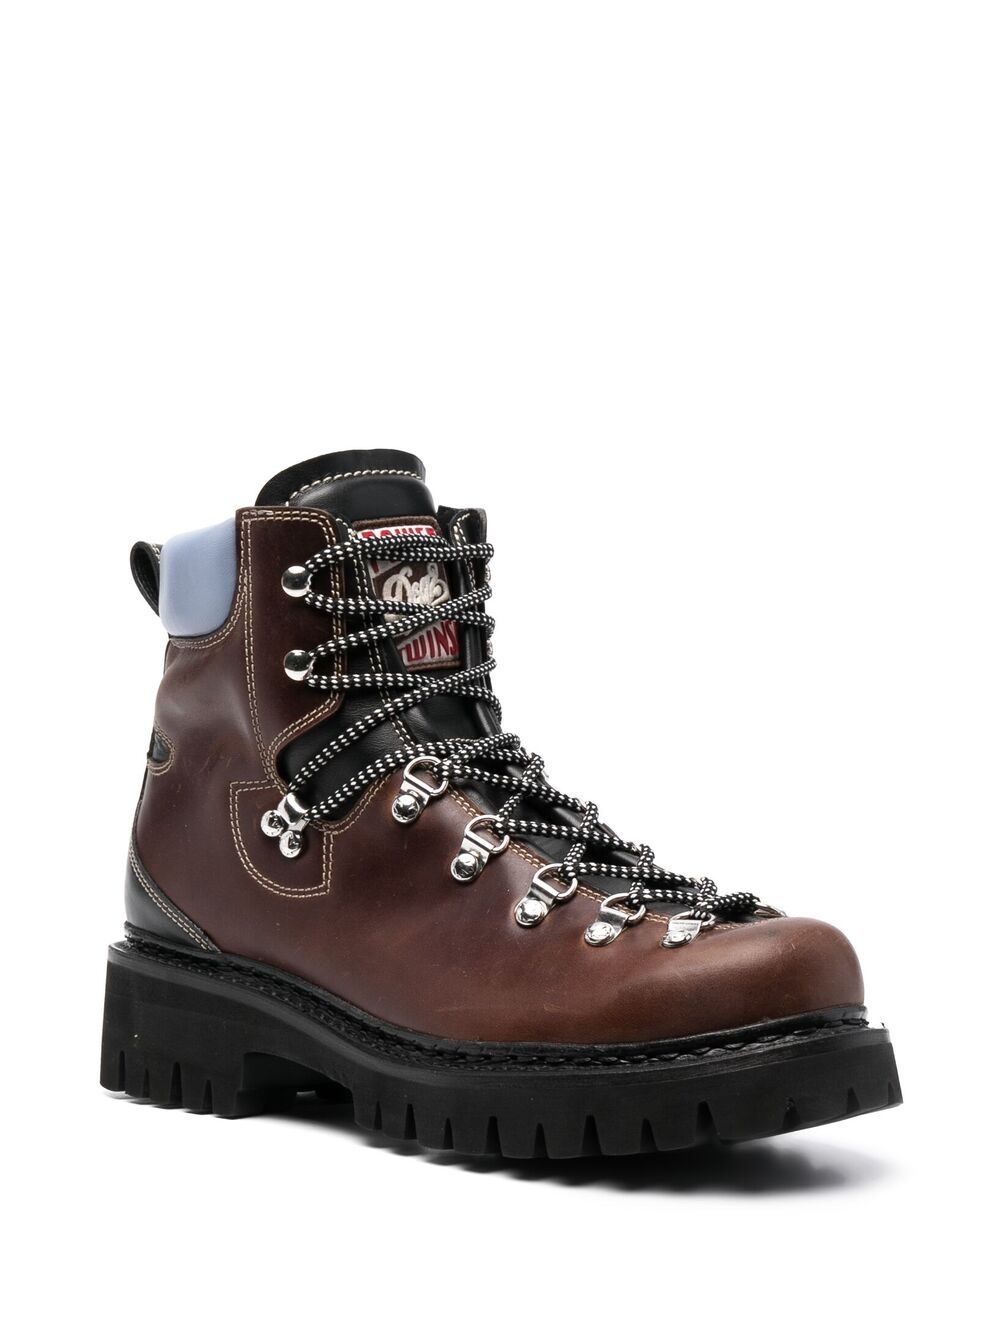 Dsquared2 hiker-style Boots - Farfetch